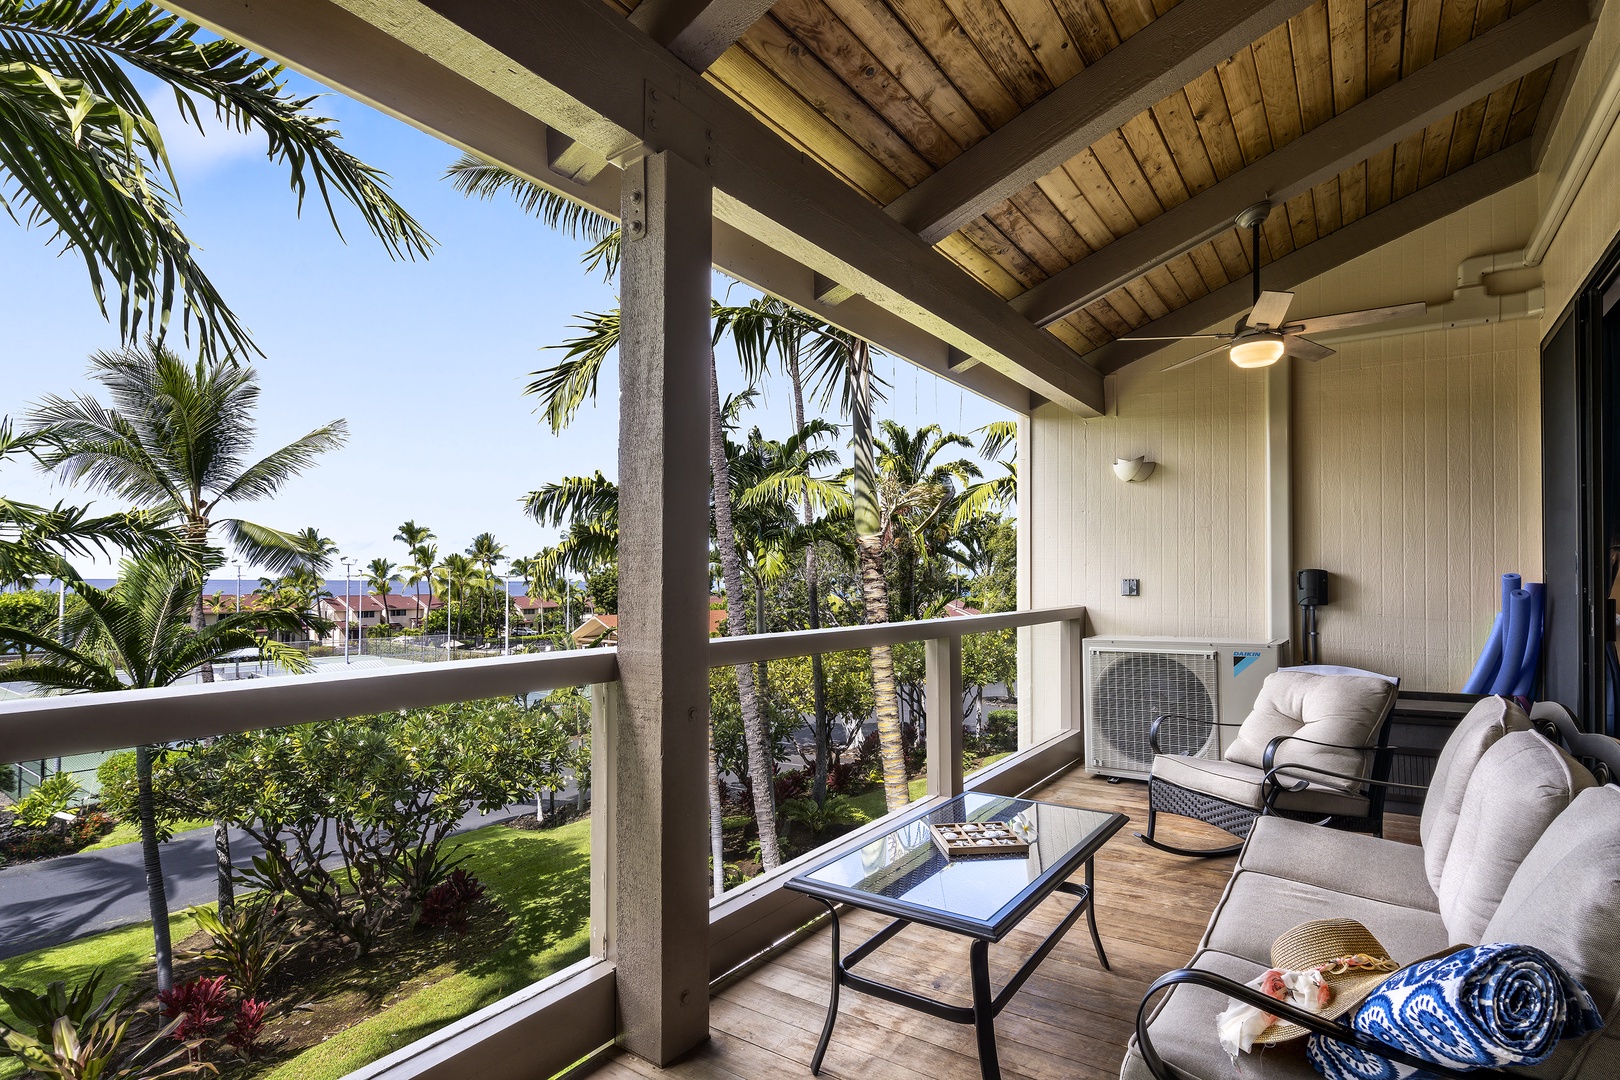 Kailua Kona Vacation Rentals, Keauhou Kona Surf & Racquet 9303 - There are a number of seating options on the spacious Lanai